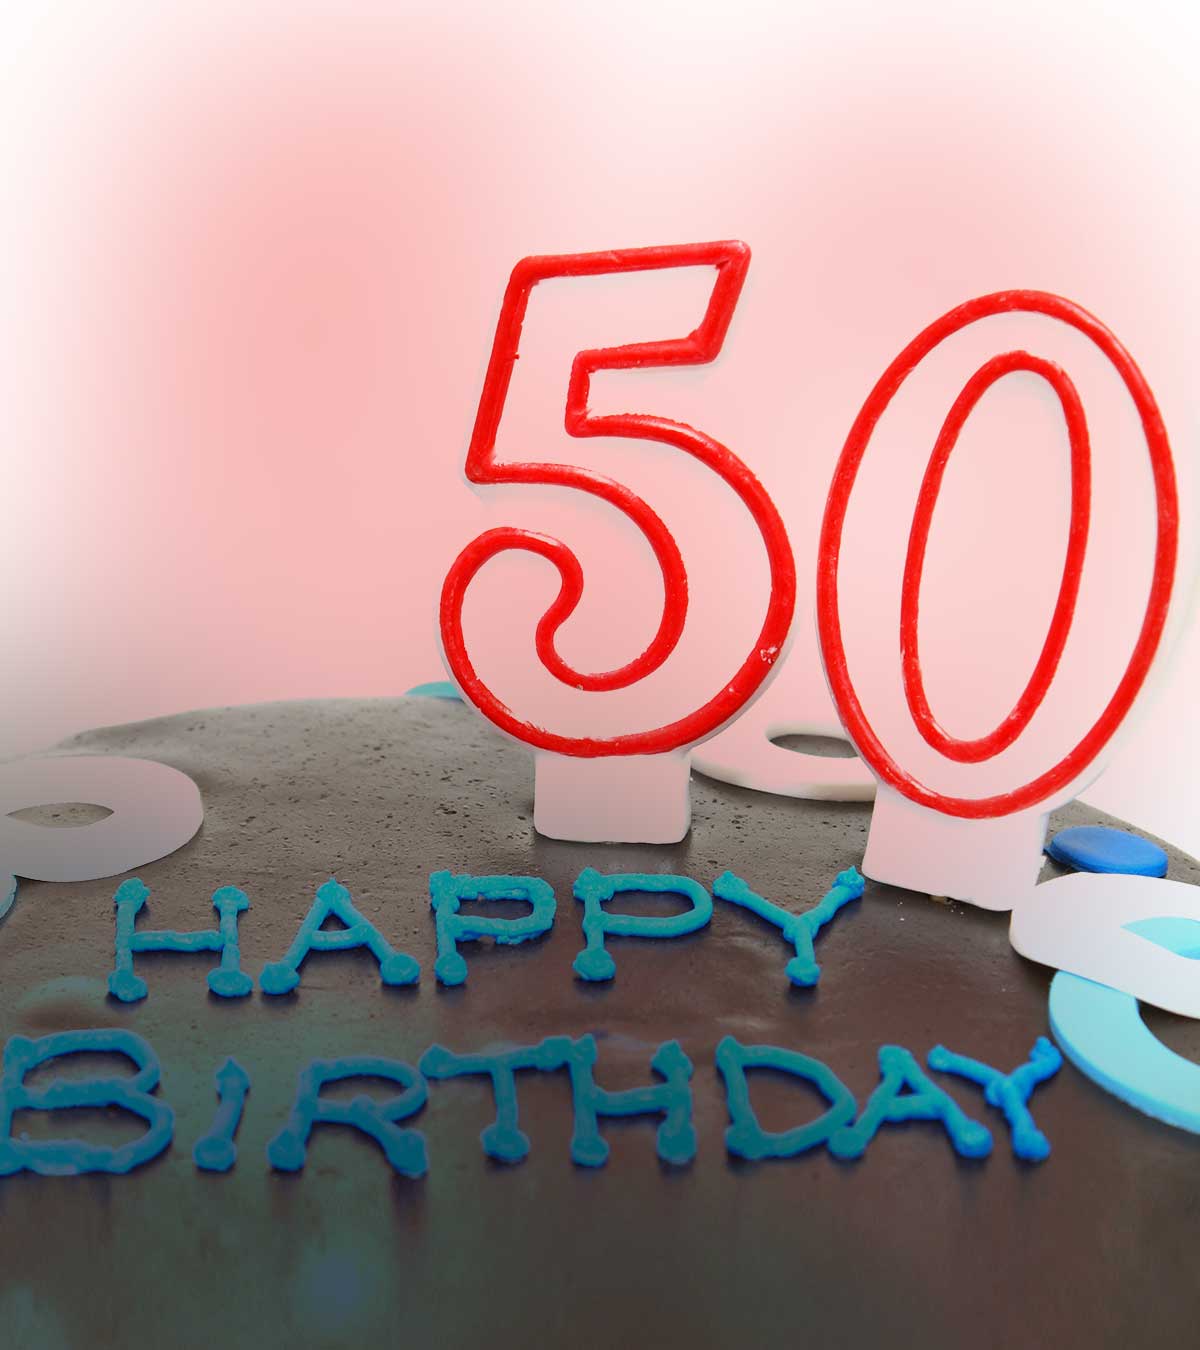 151+ Happy 50th Birthday Wishes, Messages And Quotes